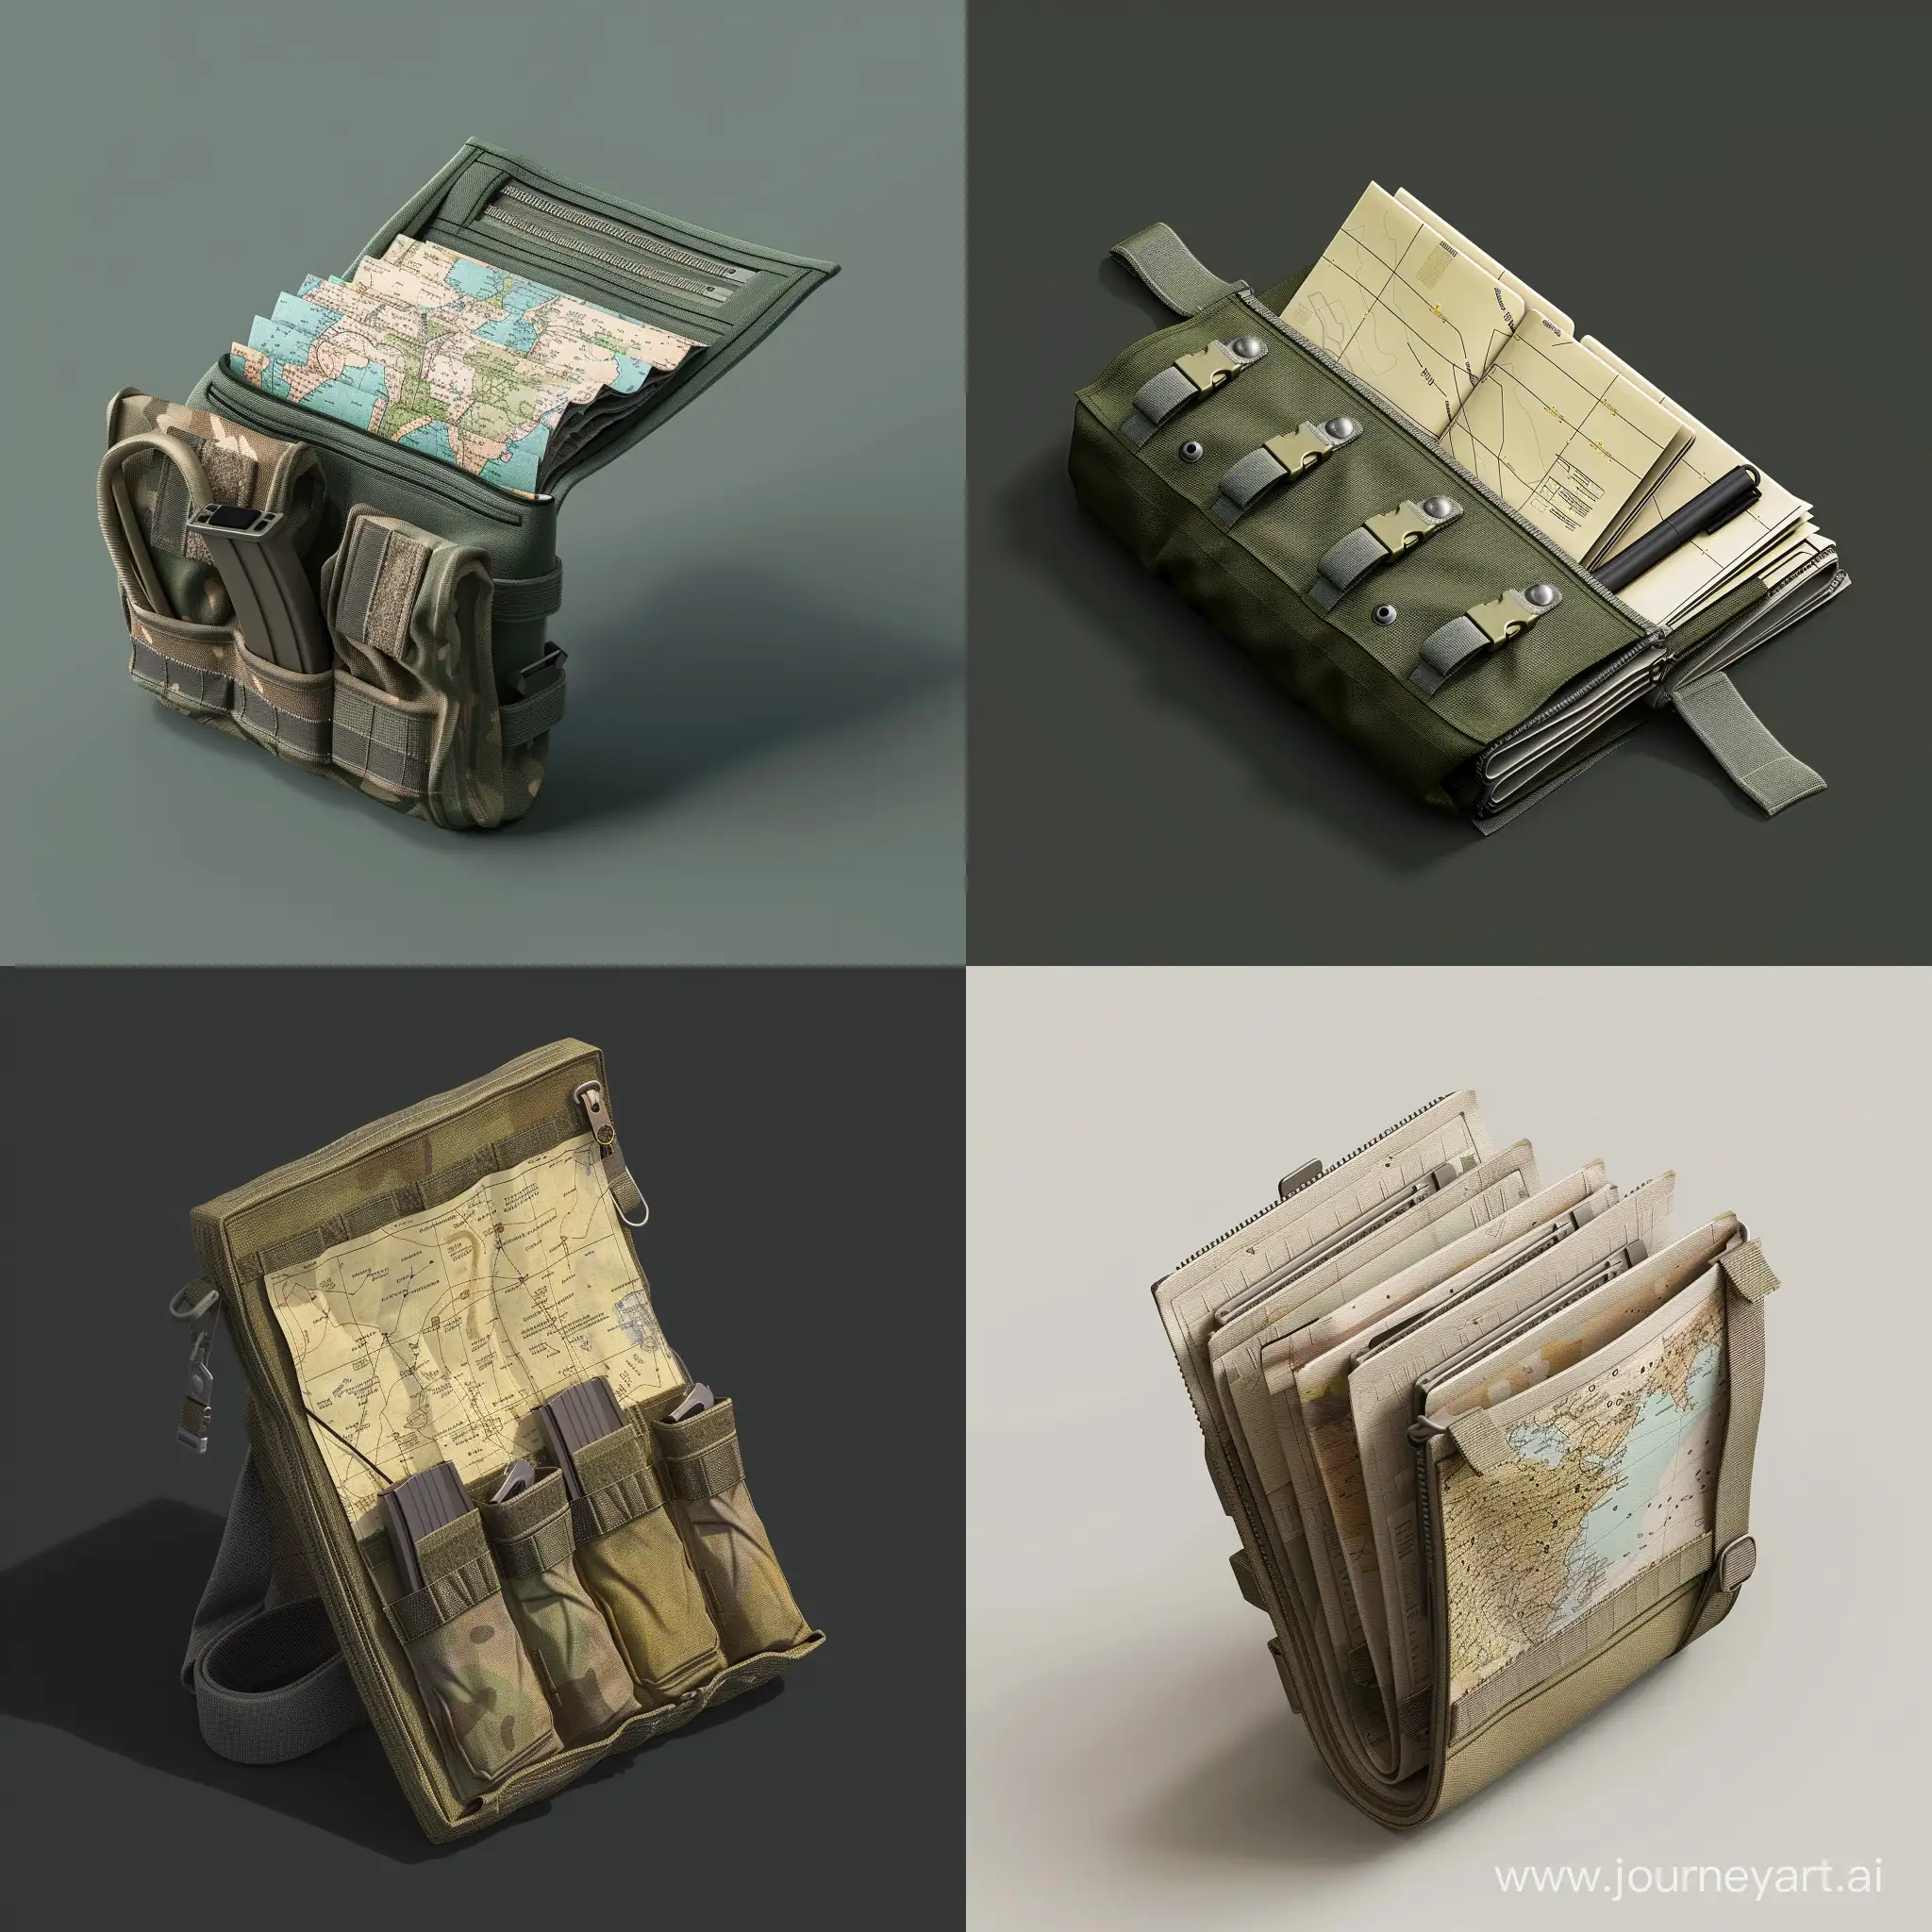 Isometric-Military-Mapping-Cartographic-Set-3D-Render-Tarkov-Style